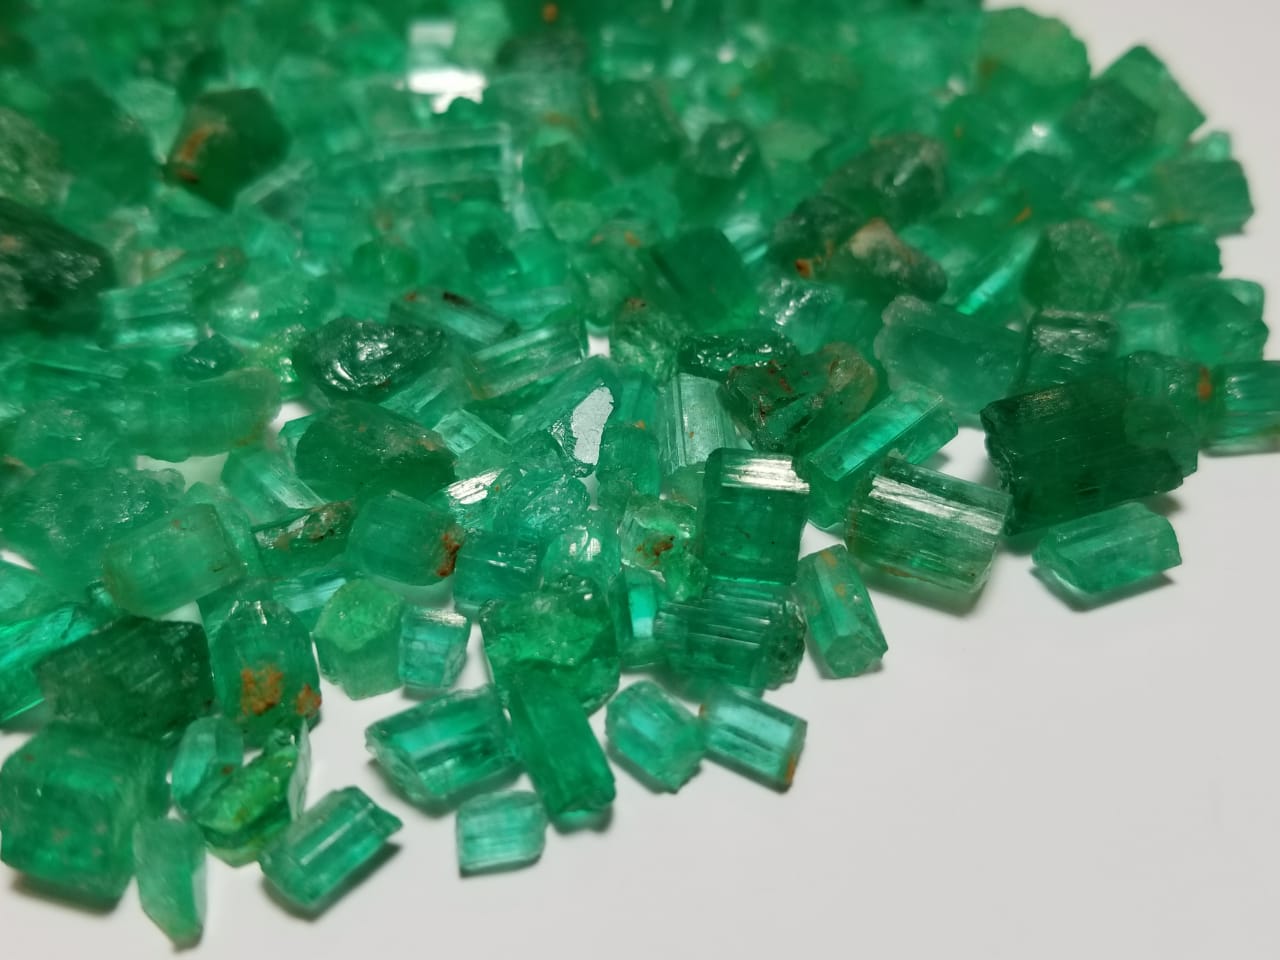 Buy Facet Grade Rough Emeralds Lot available for sale